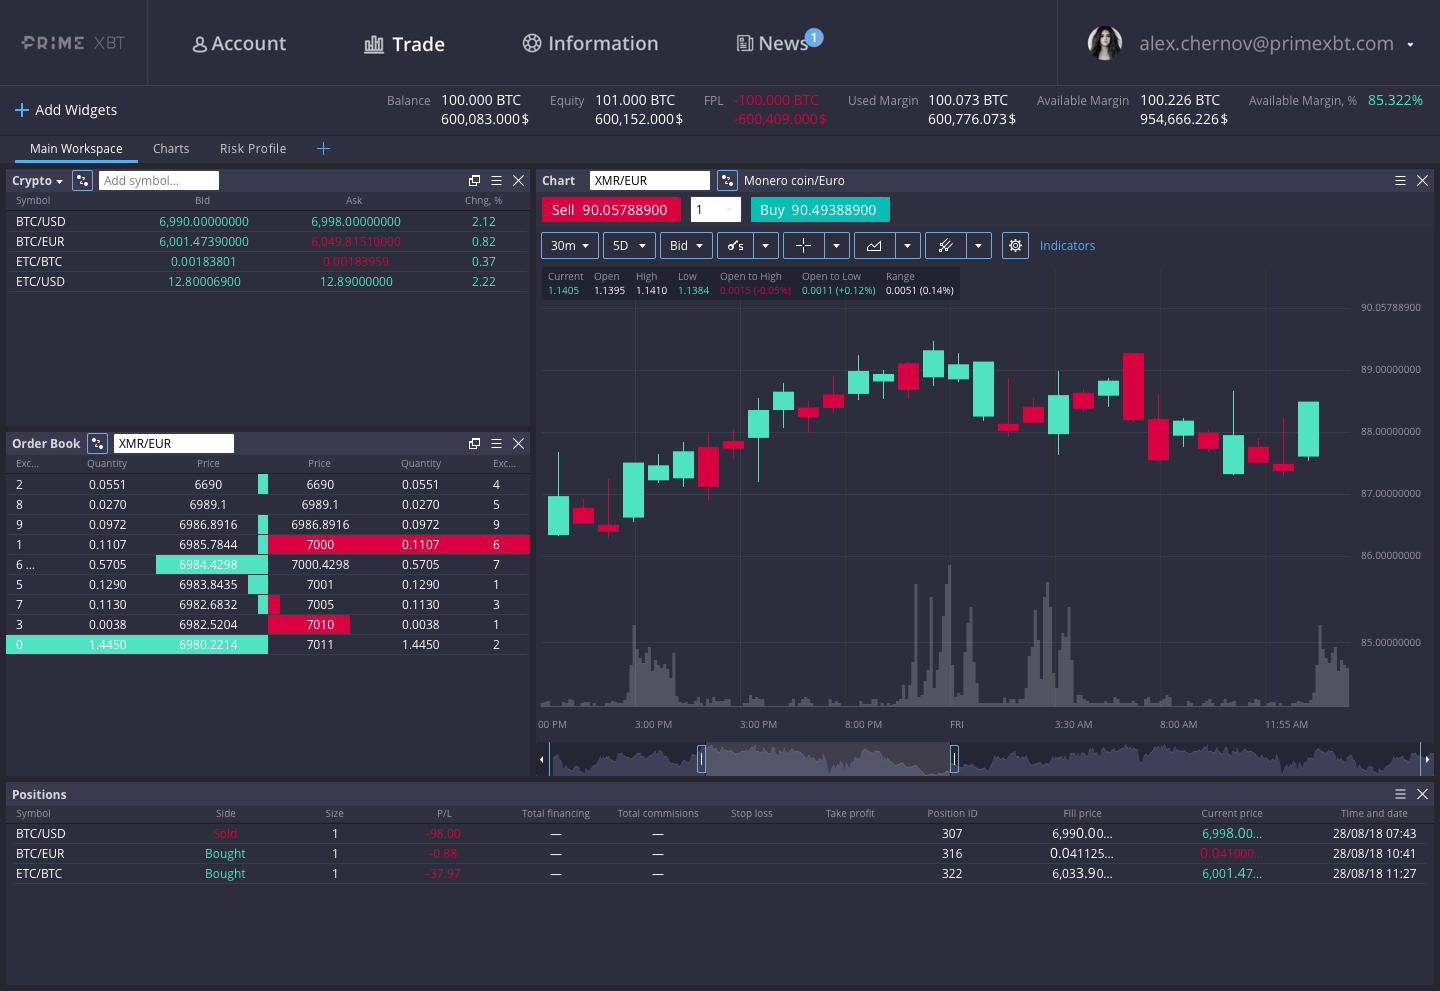 PrimeXBT: How to trade with 100x your deposit and earn more